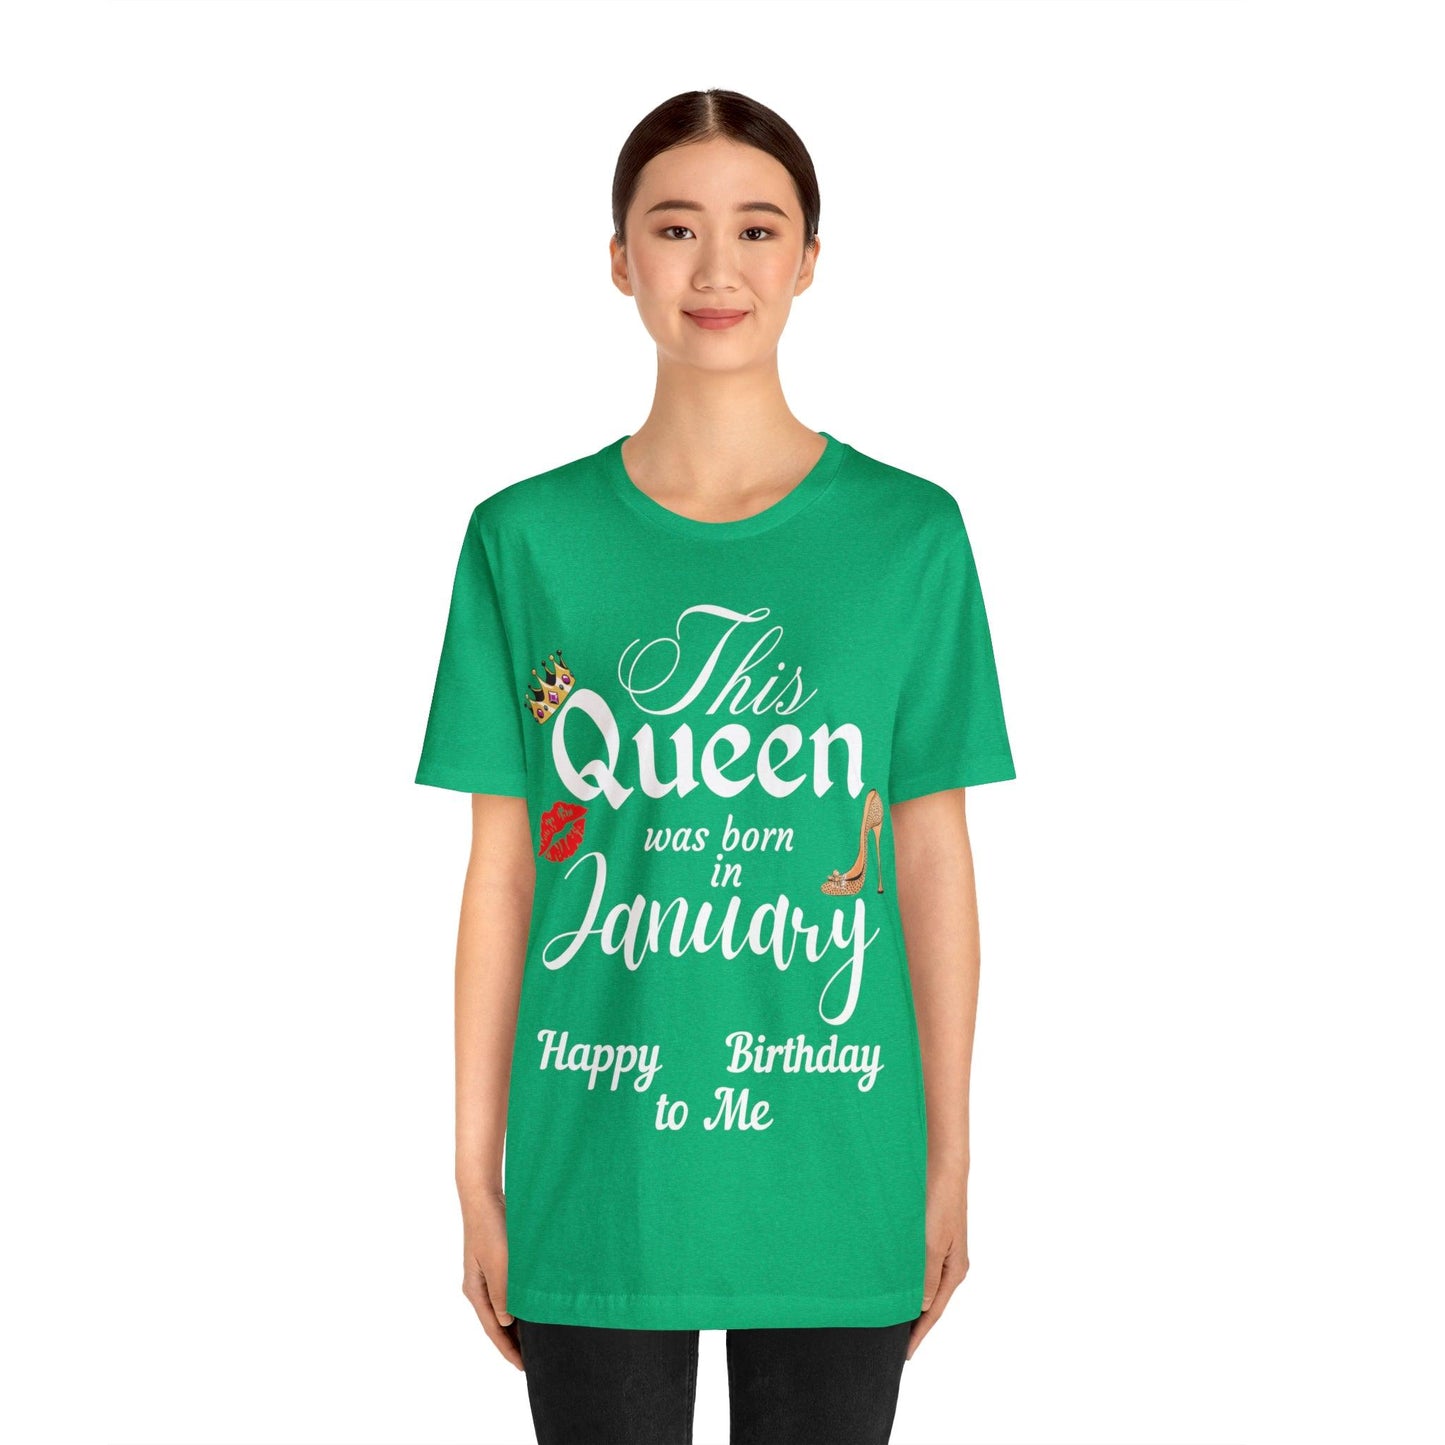 Birthday Queen Shirt, Gift for Birthday, This Queen was born in January Shirt, Funny Queen Shirt, Funny Birthday Shirt, Birthday Gift - Giftsmojo